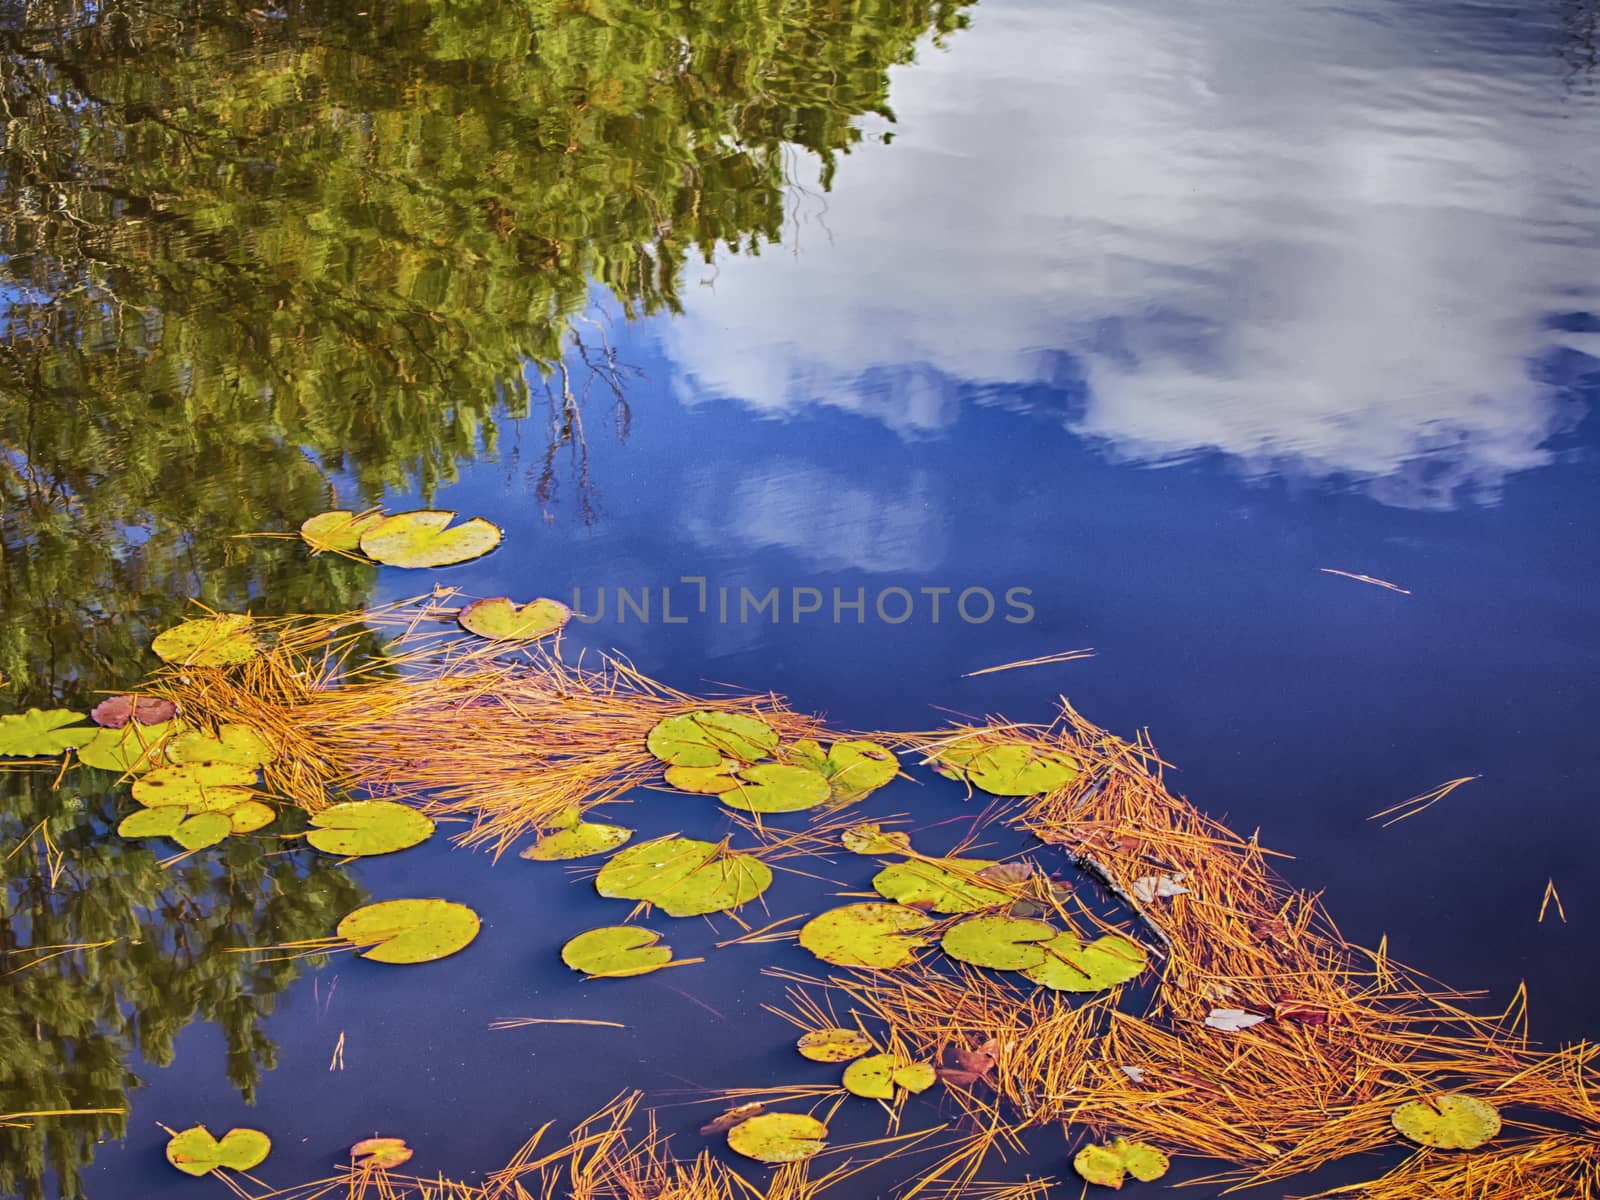 Reflections of trees and sky in a small lily pond